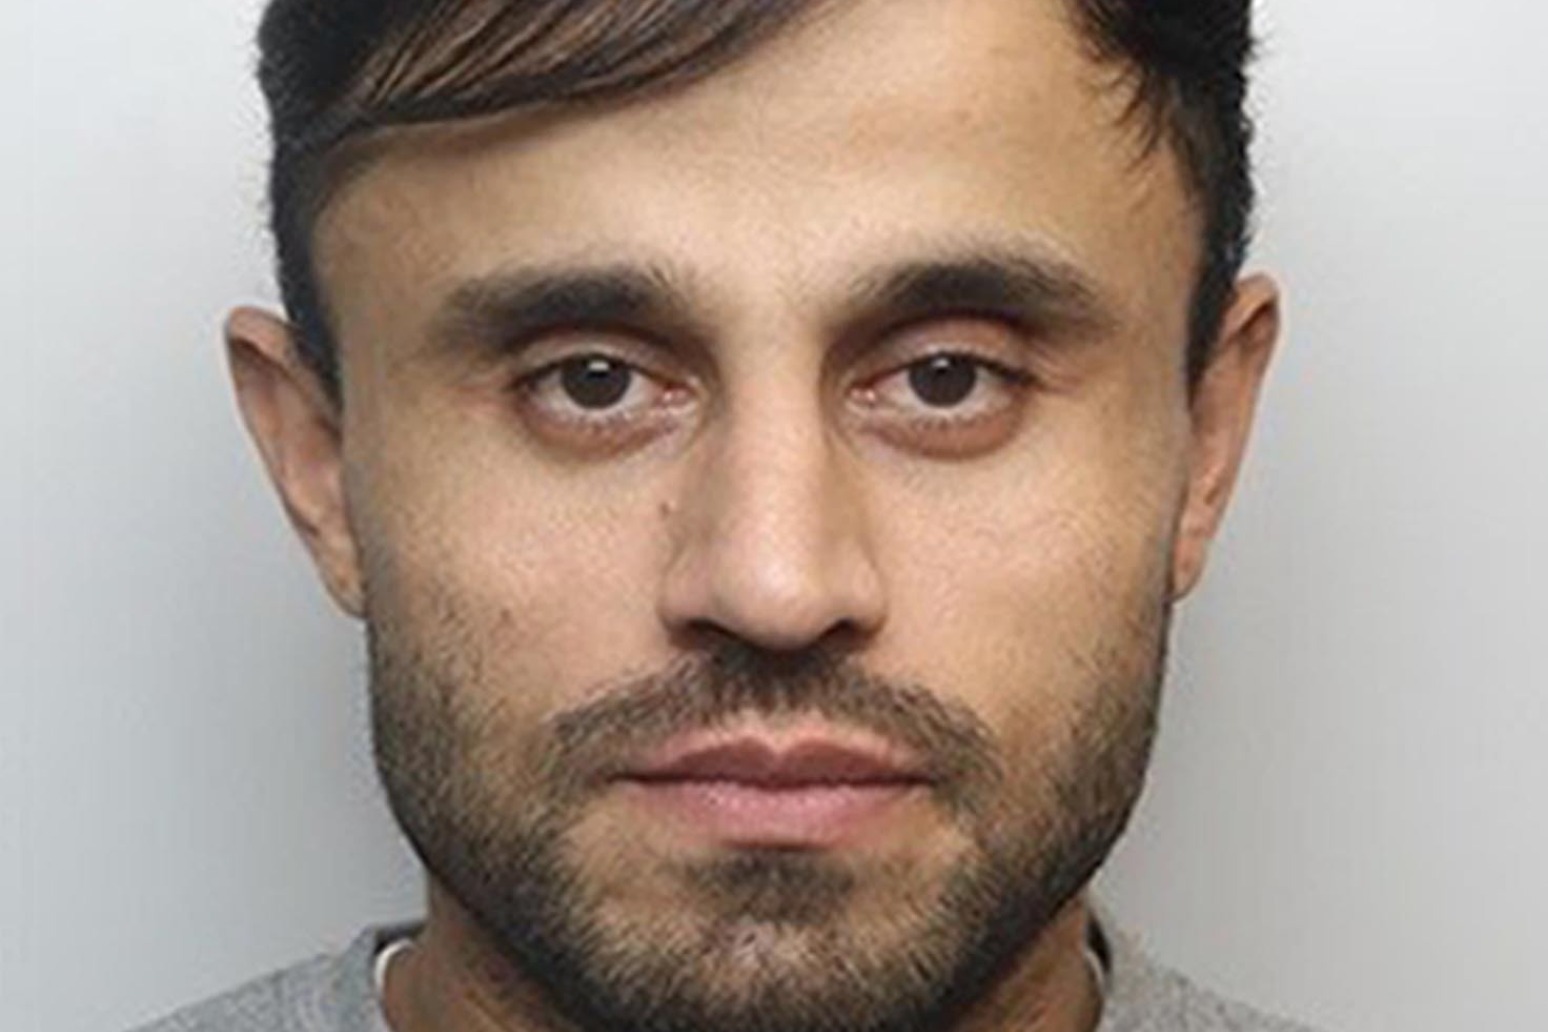 Predator jailed for 22 years after drugging and sexually assaulting two men